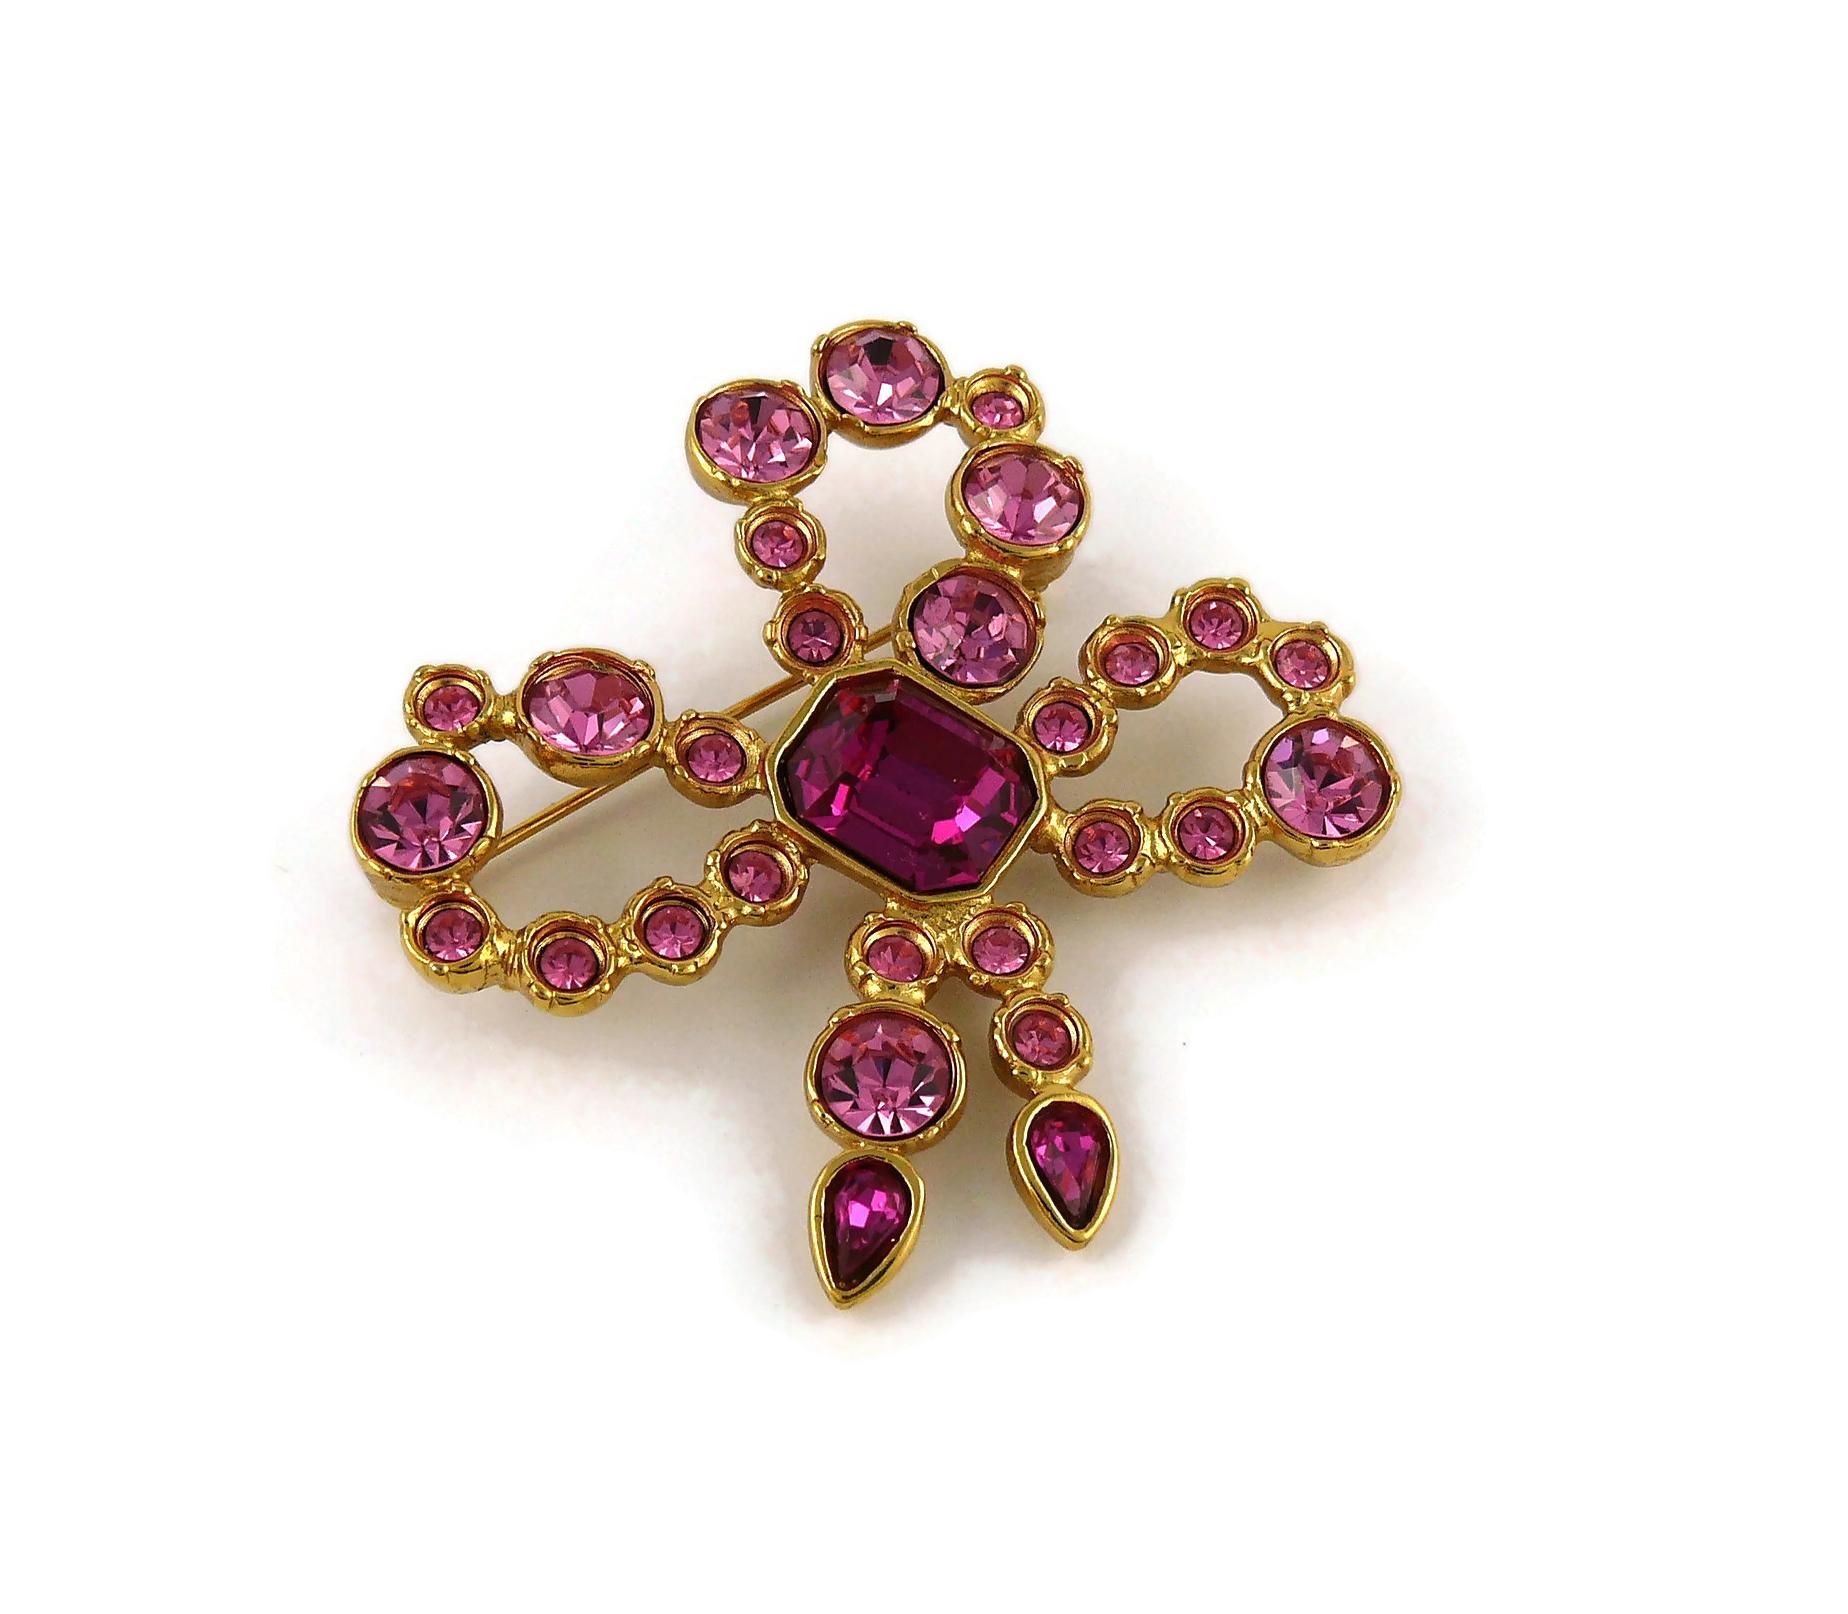 Yves Saint Laurent YSL Vintage Jeweled Bow Brooch In Excellent Condition For Sale In Nice, FR